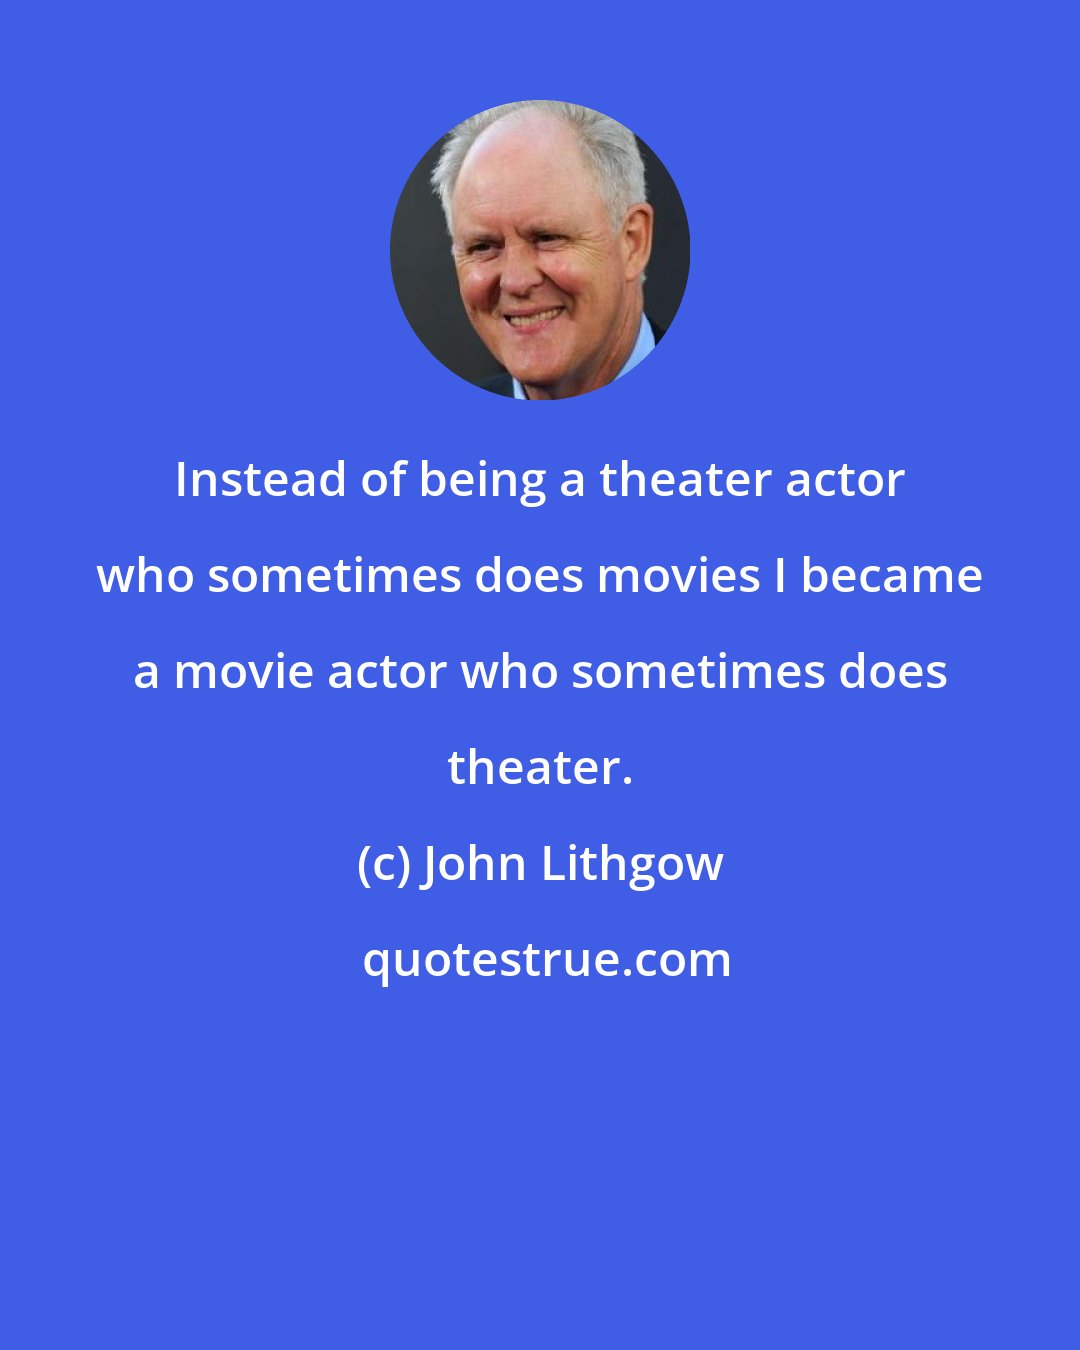 John Lithgow: Instead of being a theater actor who sometimes does movies I became a movie actor who sometimes does theater.